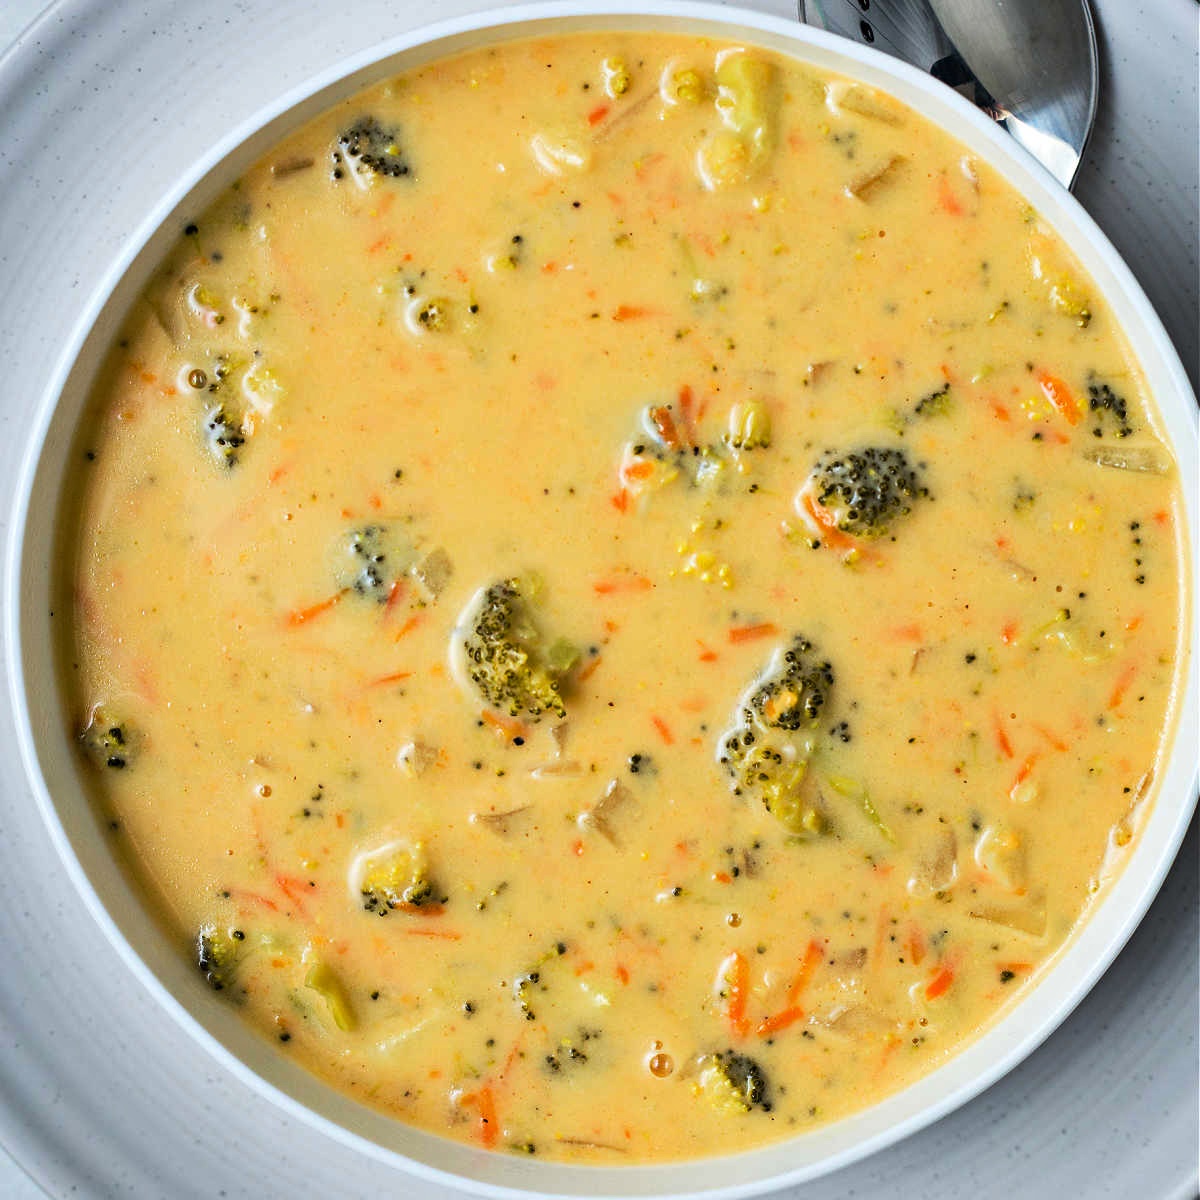 How To Make Broccoli And Cheddar Cheese Soup - Recipes.net